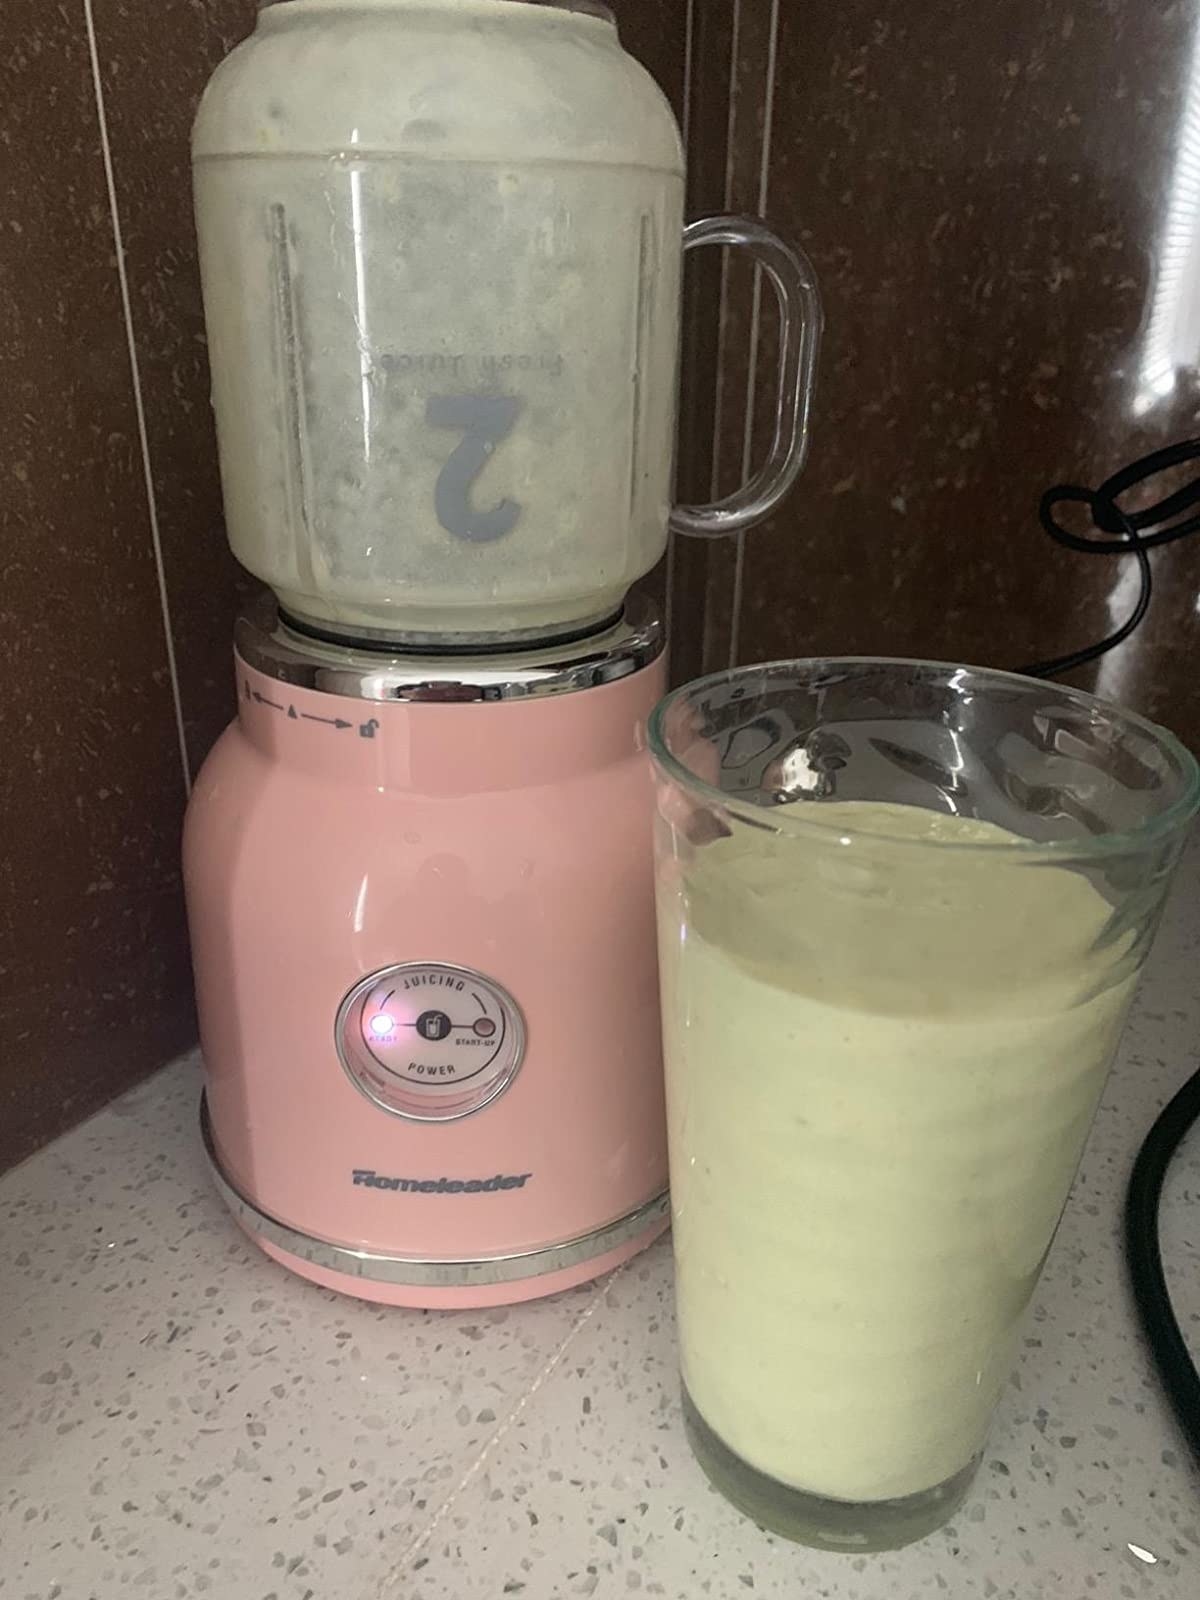 A reviewer photo of the blender and a smoothie blended in the blender